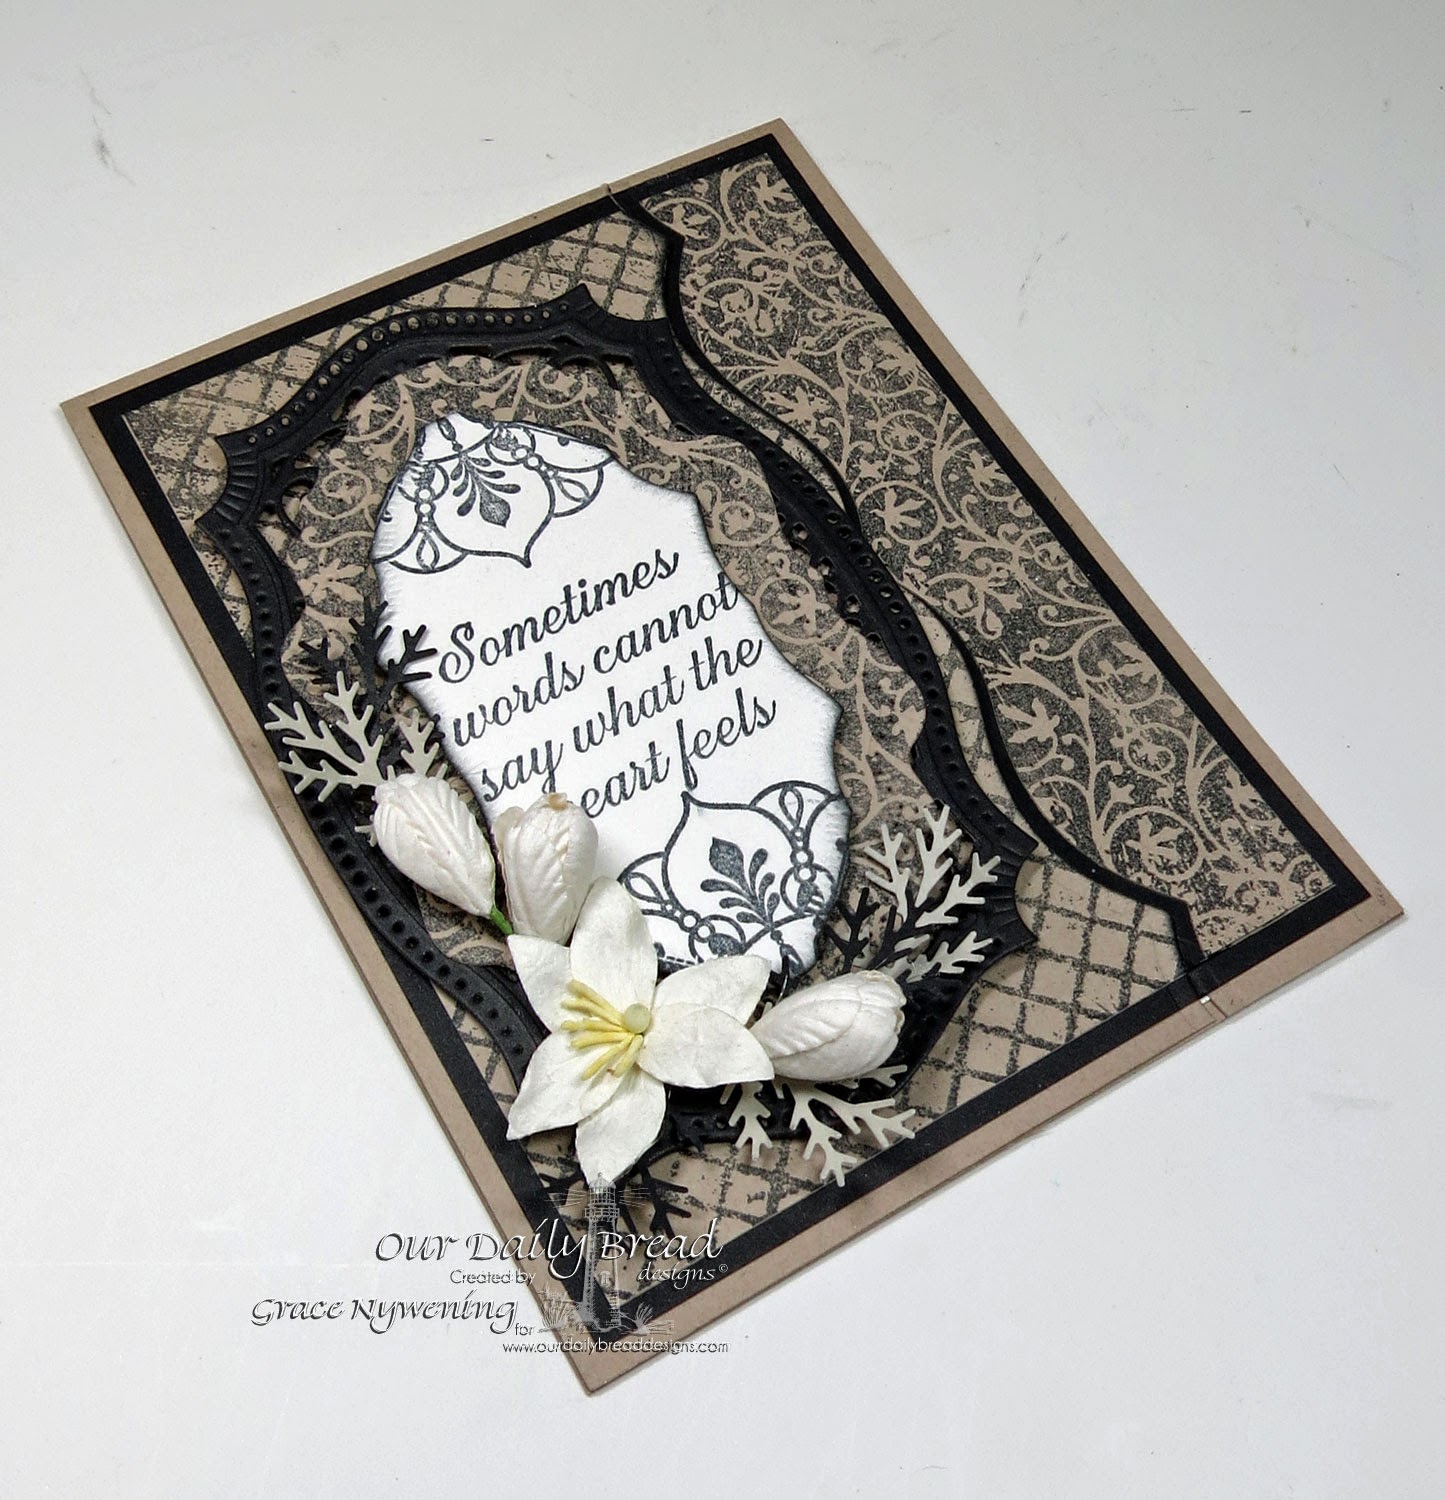 Our Daily Bread designs stamps" Chalkboard Vine Background, Chalkboard Lattice Background, No Words, Ornate Borders and Flowers, ODBD Vintage Flourish Pattern Dies, designed by Grace Nywening